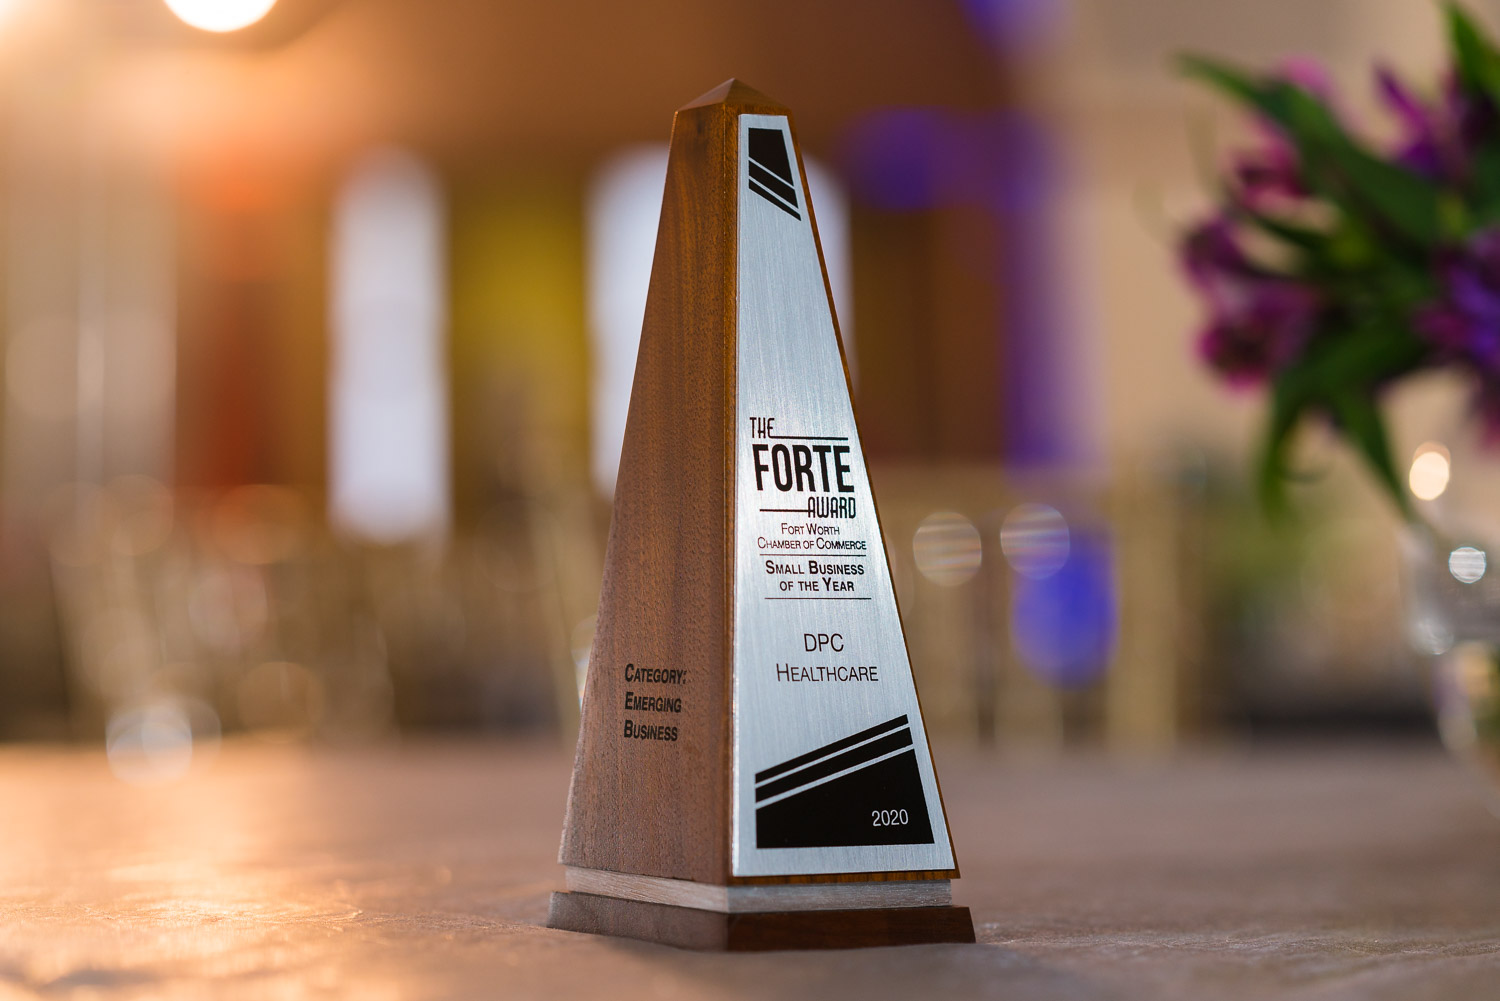 Image of the 2020 Forte Award